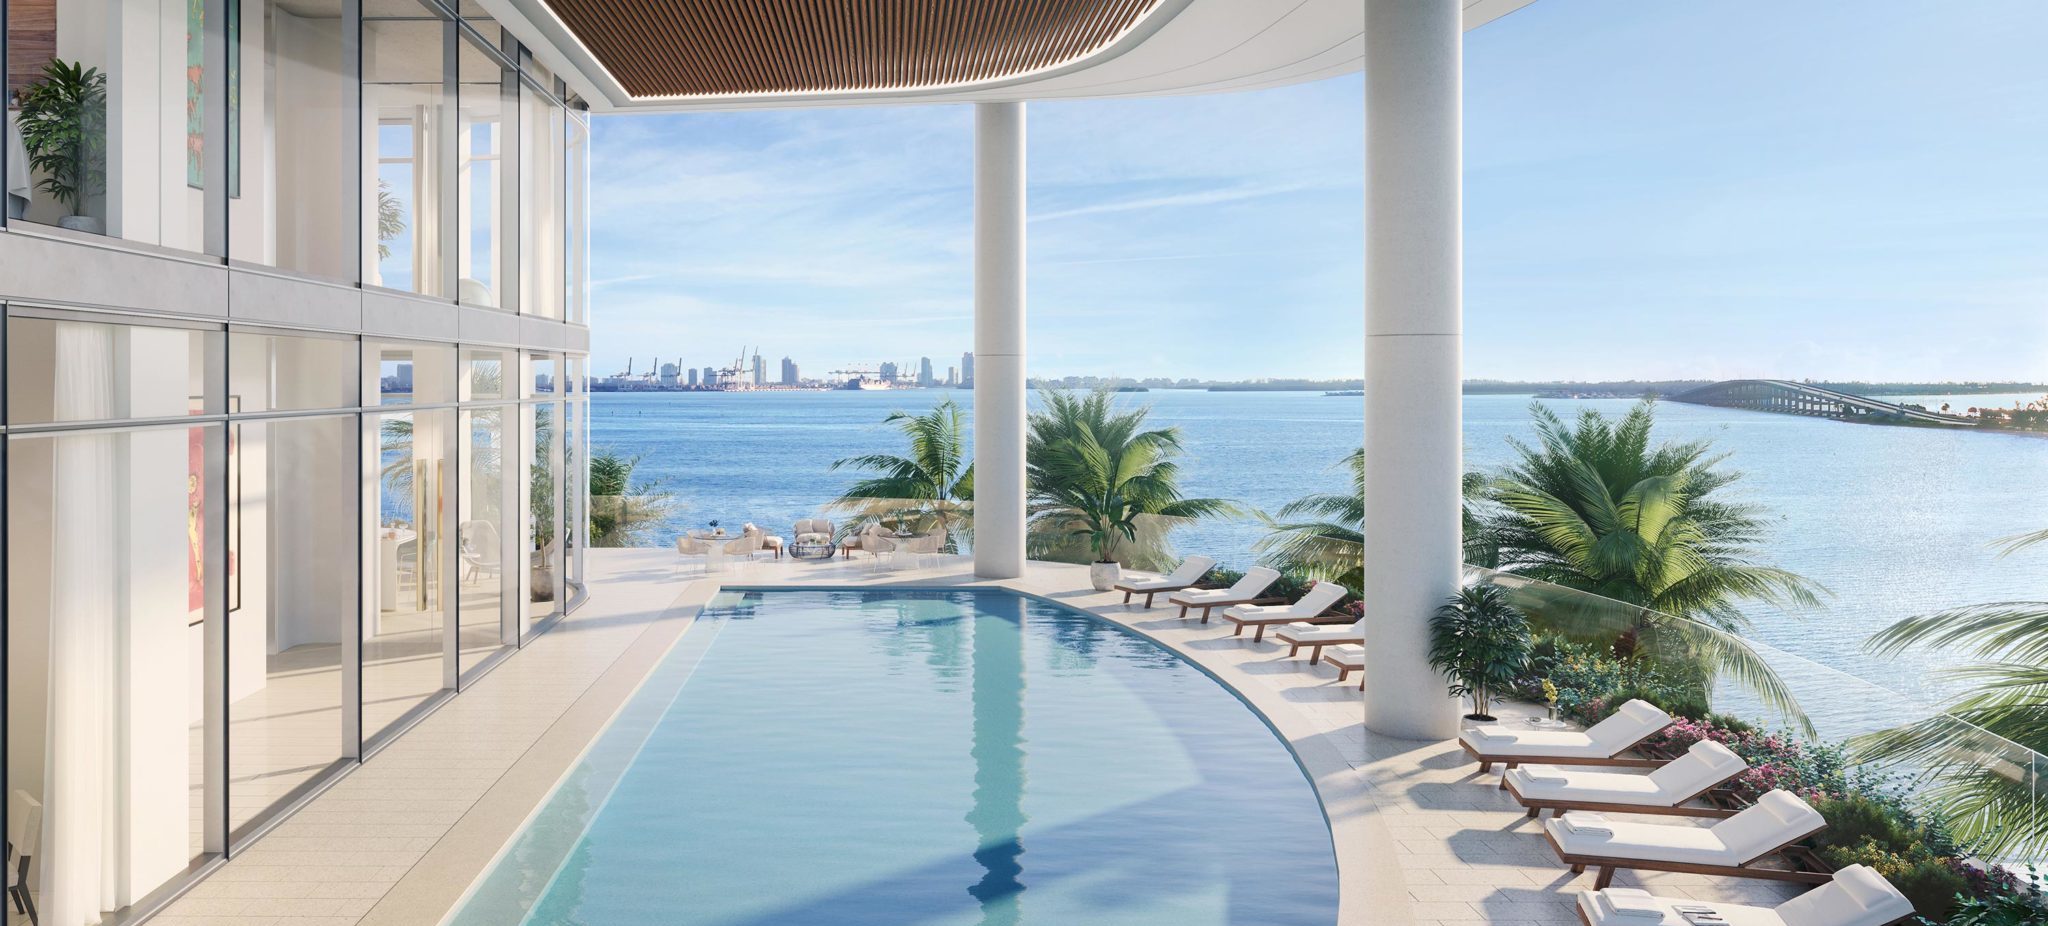 In Miami, Waterfront Property is in High Demand